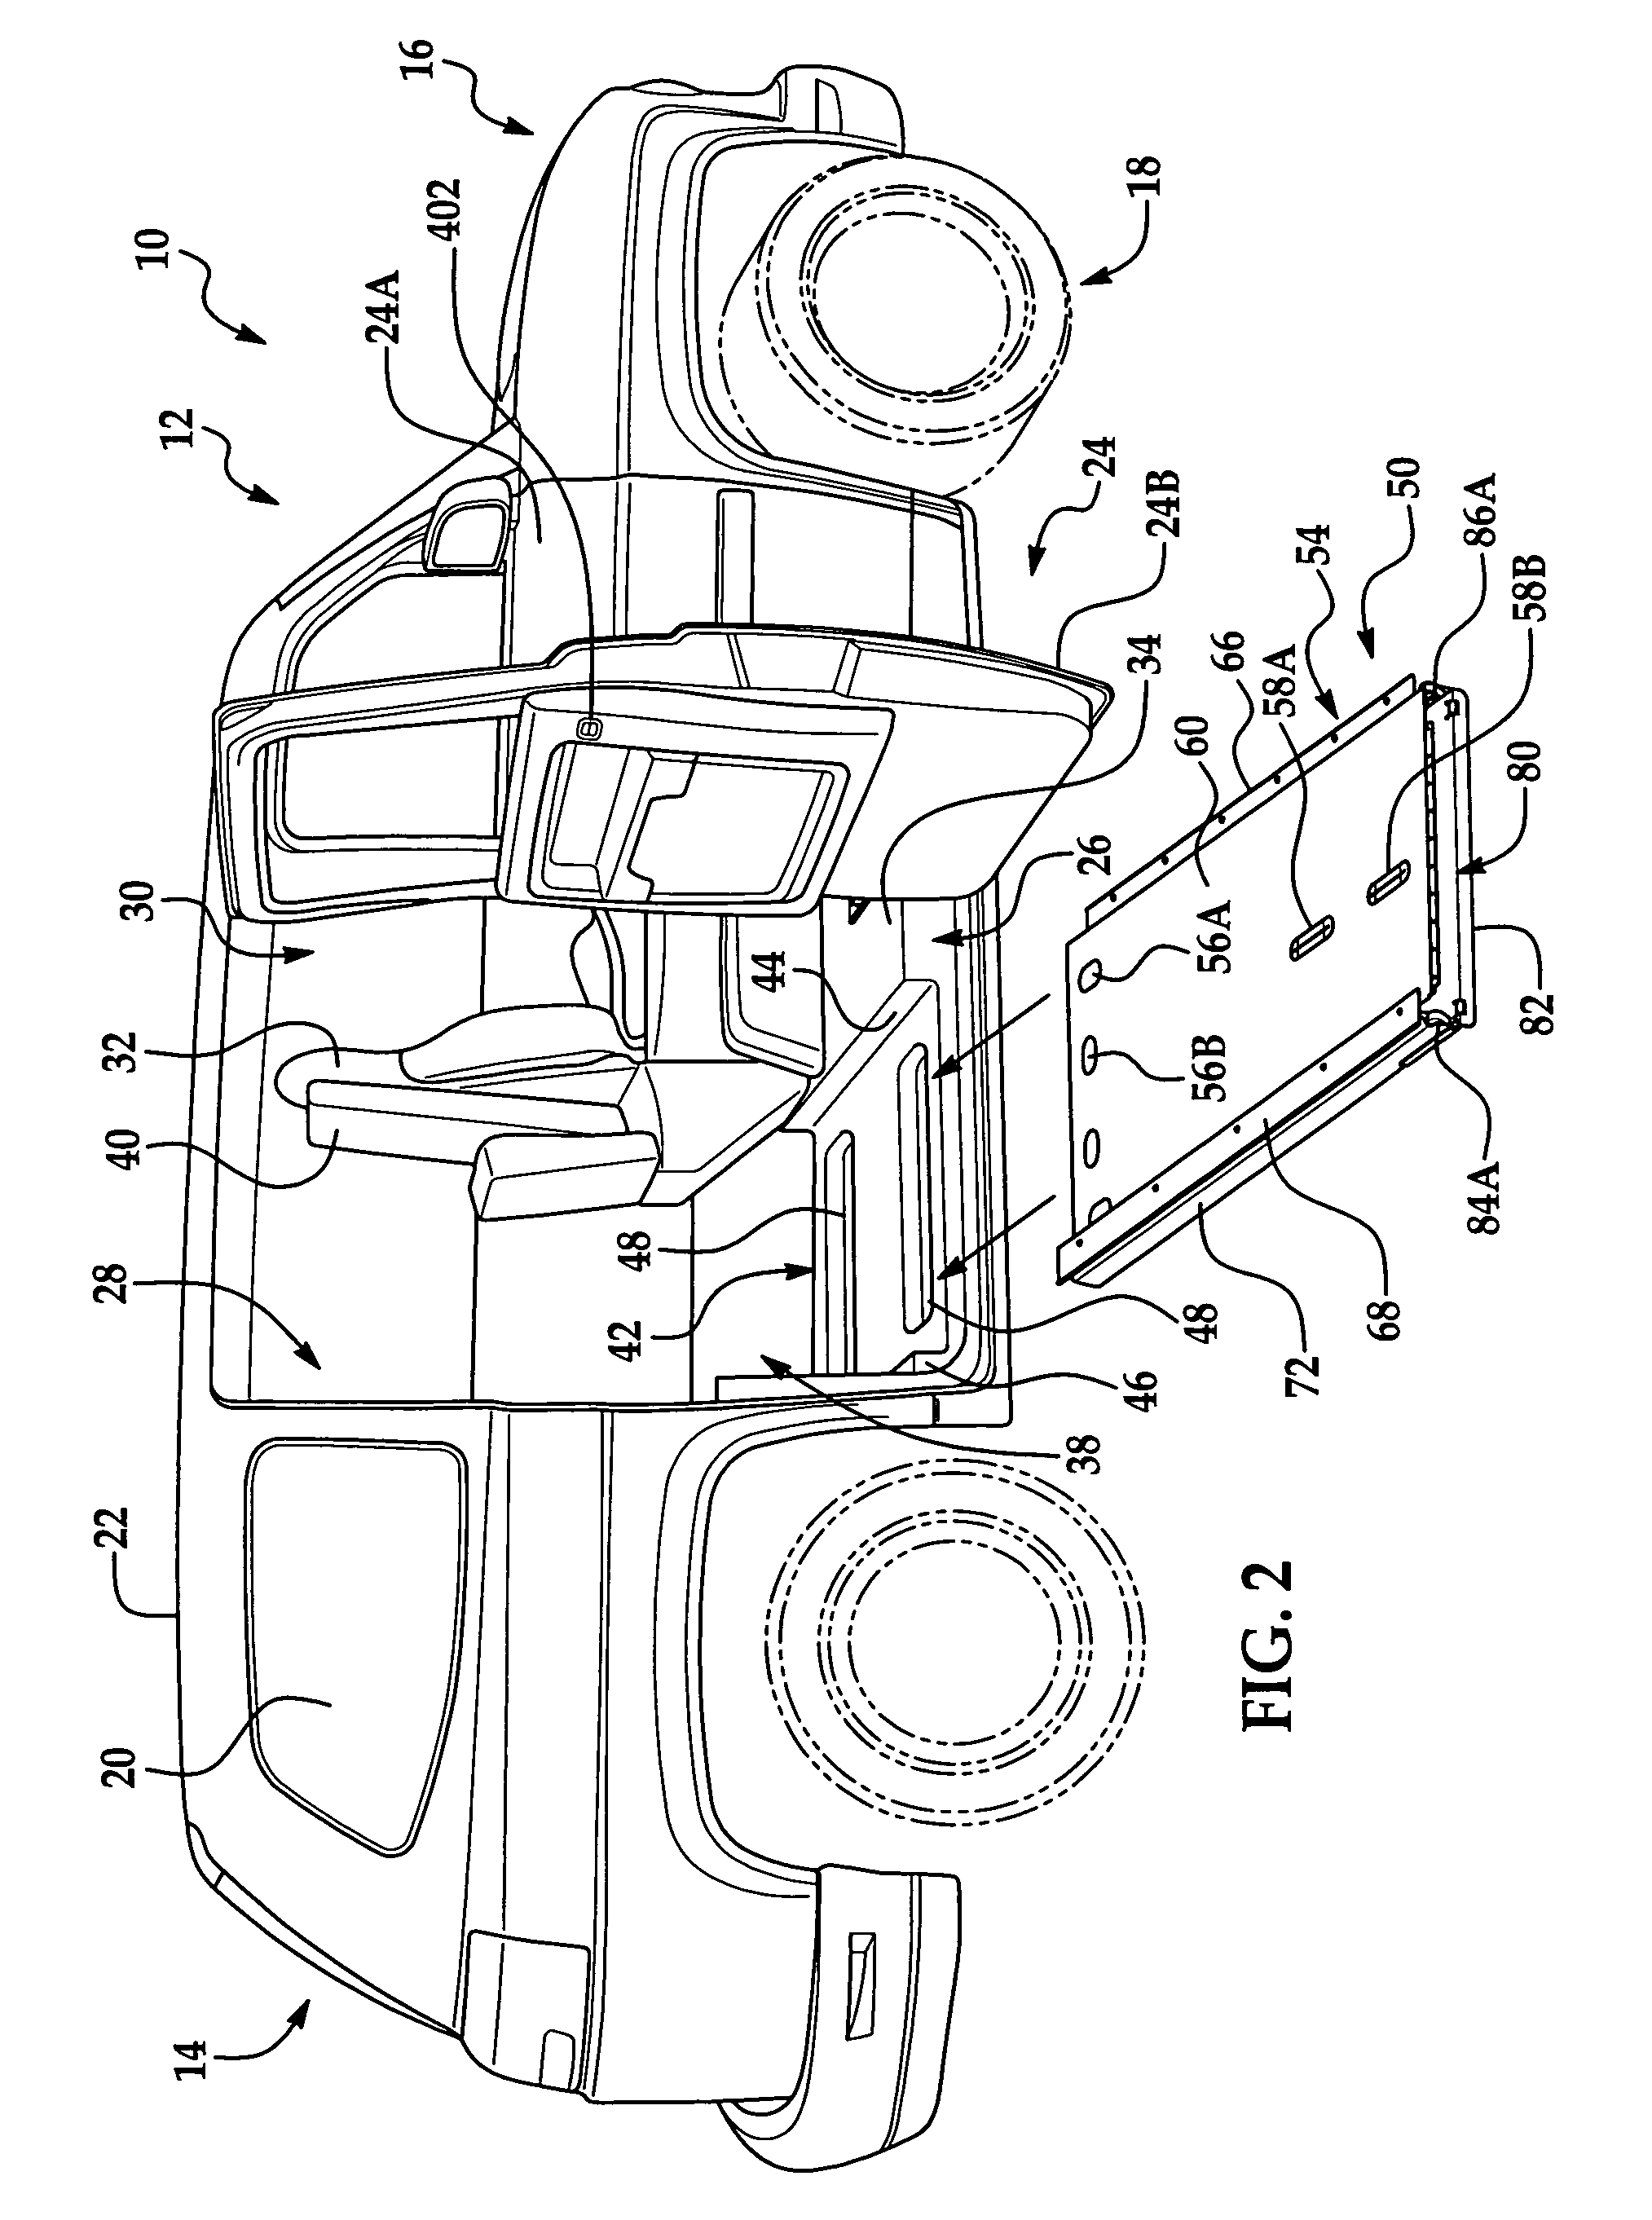 Automotive vehicle having a power-actuated ramp